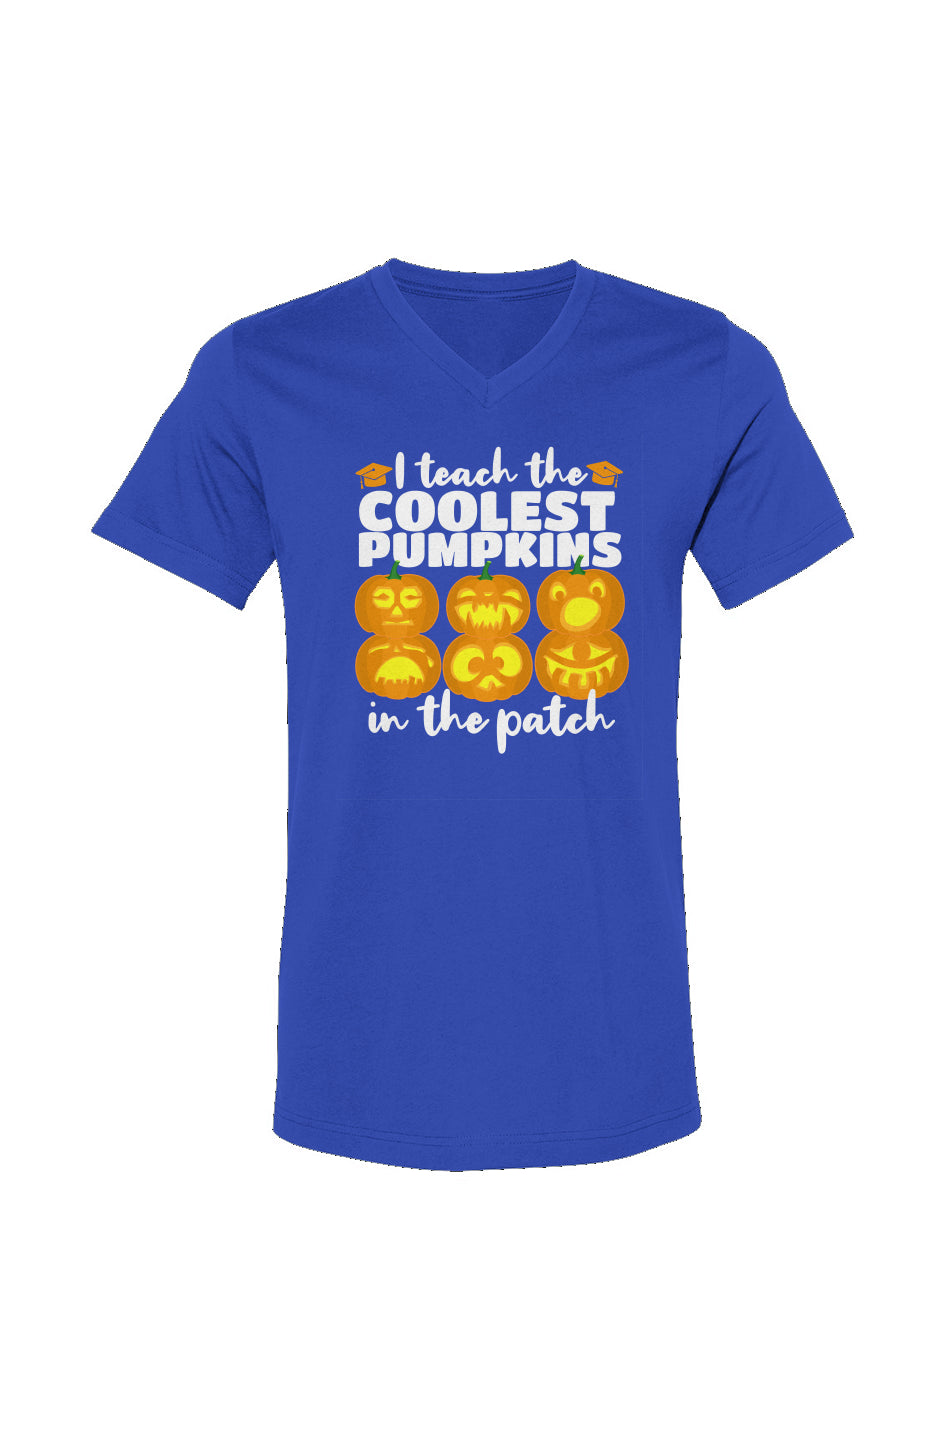 "I Teach the Coolest Pumpkins in the Patch" Unisex Fit 